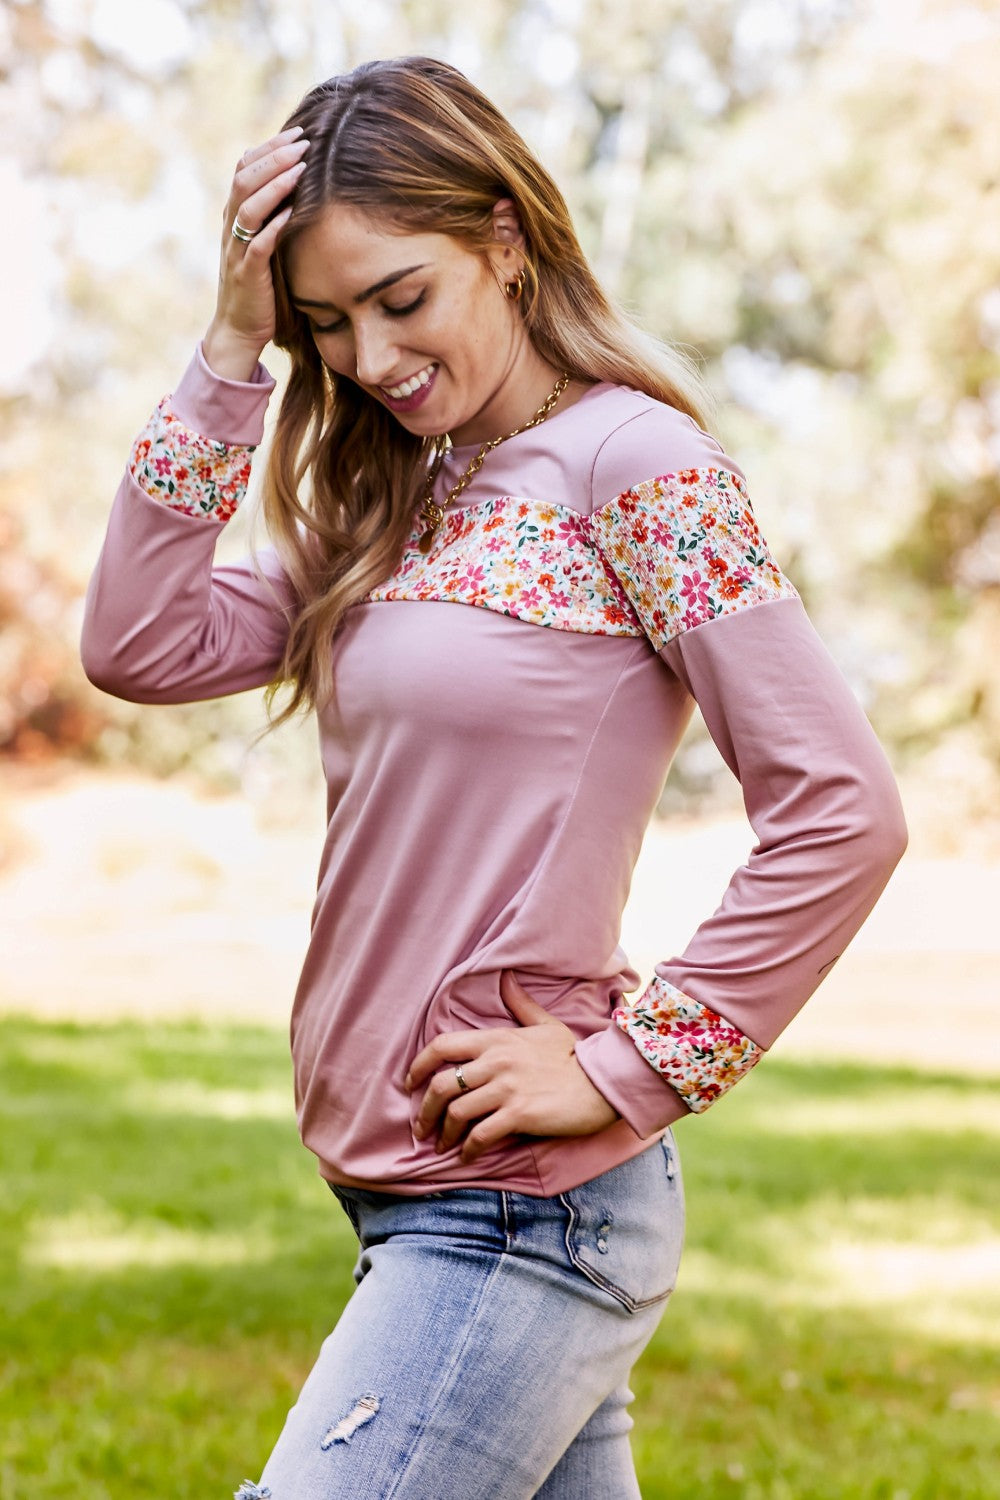 Acting Pro Floral Bloom Full Size Floral Contrast Top